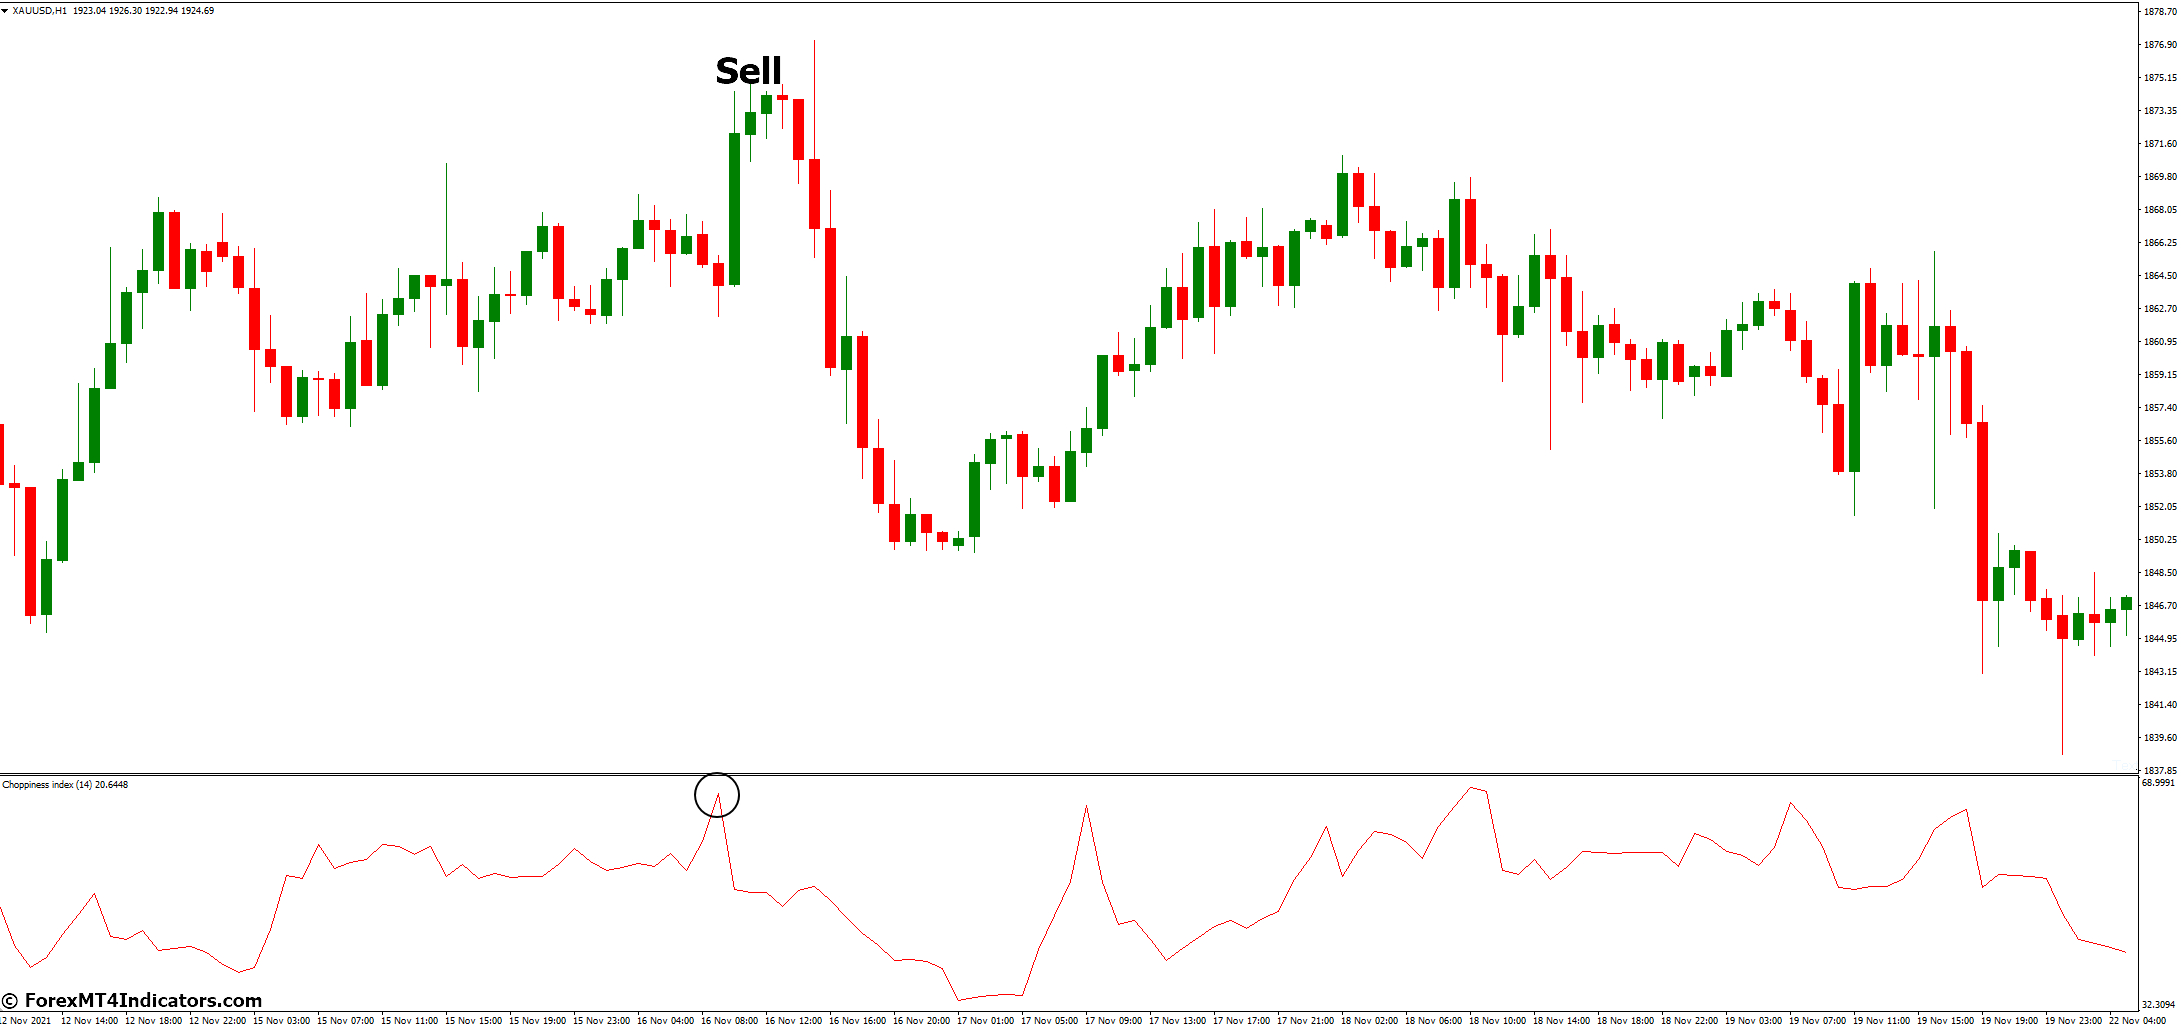 How to Trade with Choppiness Index MT4 Indicator - Sell Entry